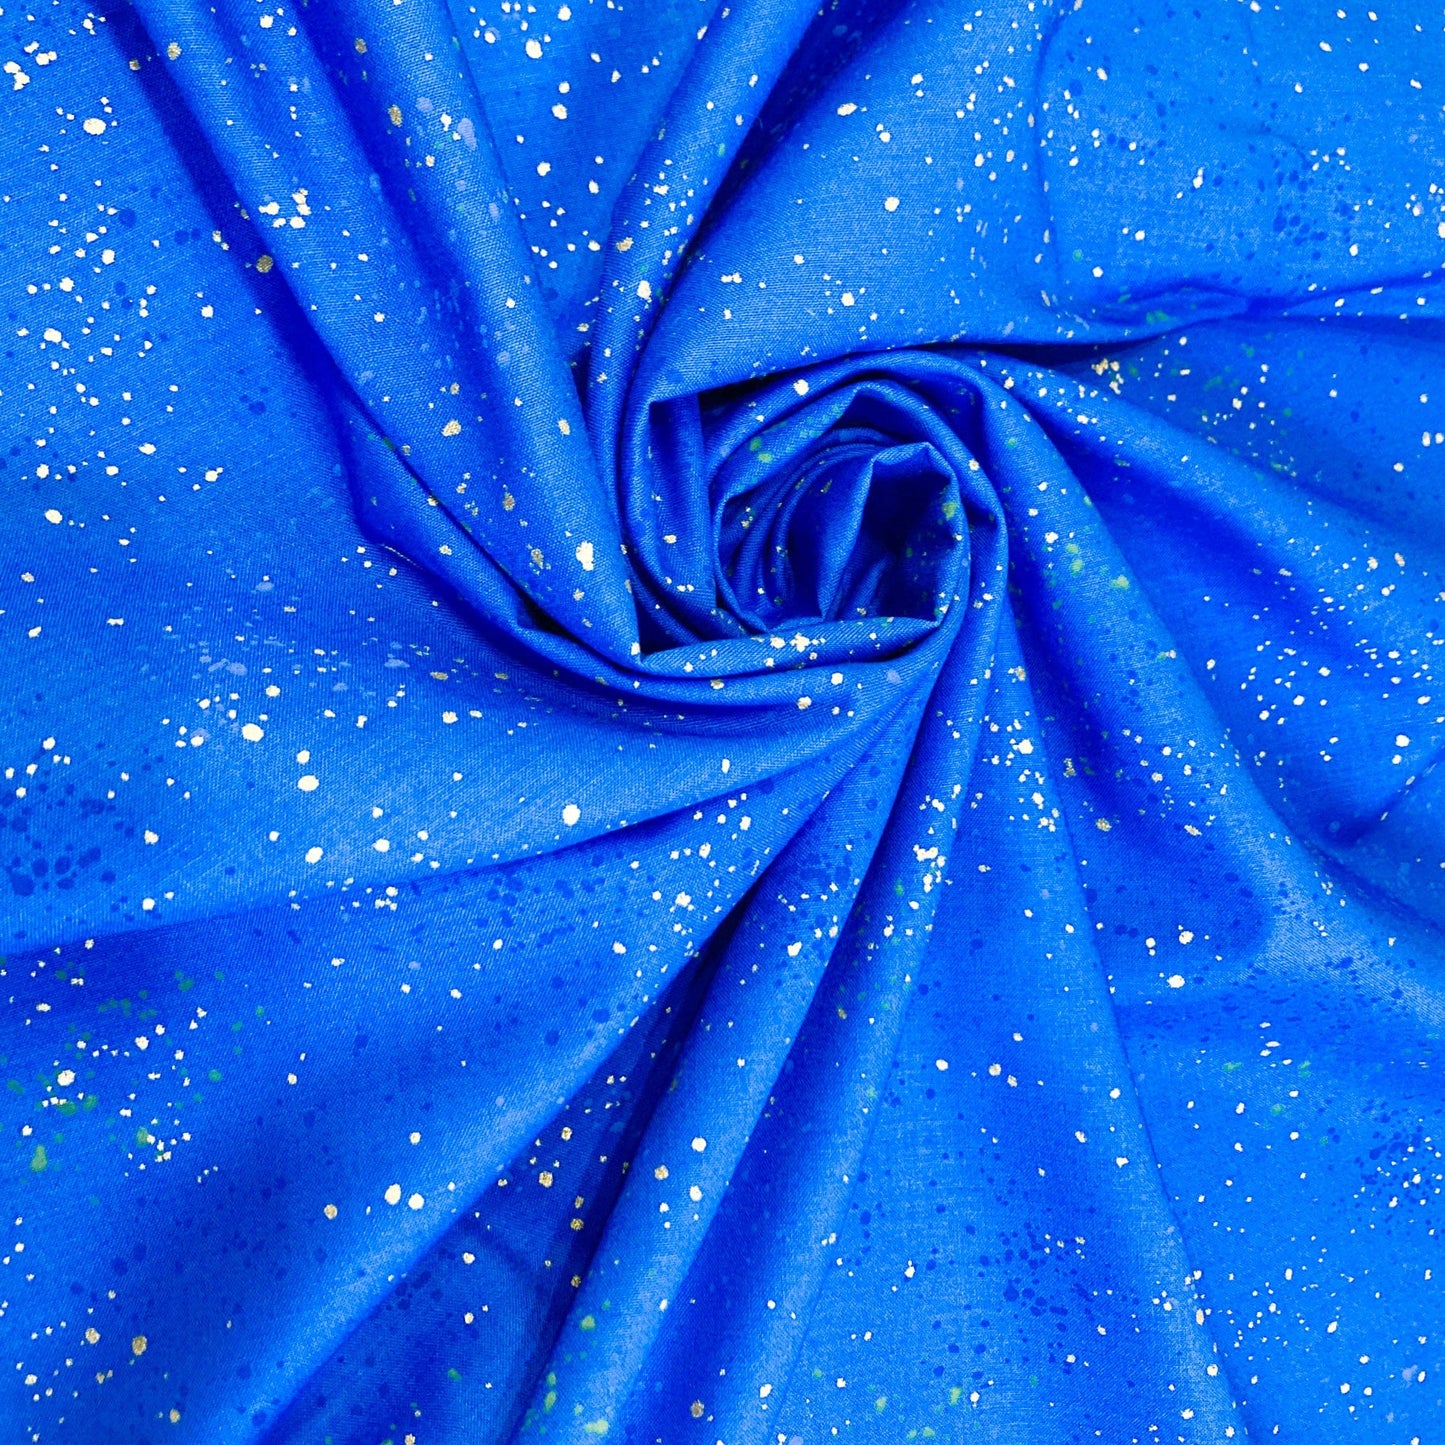 Ruby Star Society 'Speckled' Quilting Cotton in 'Blue Ribbon' (Metallic)